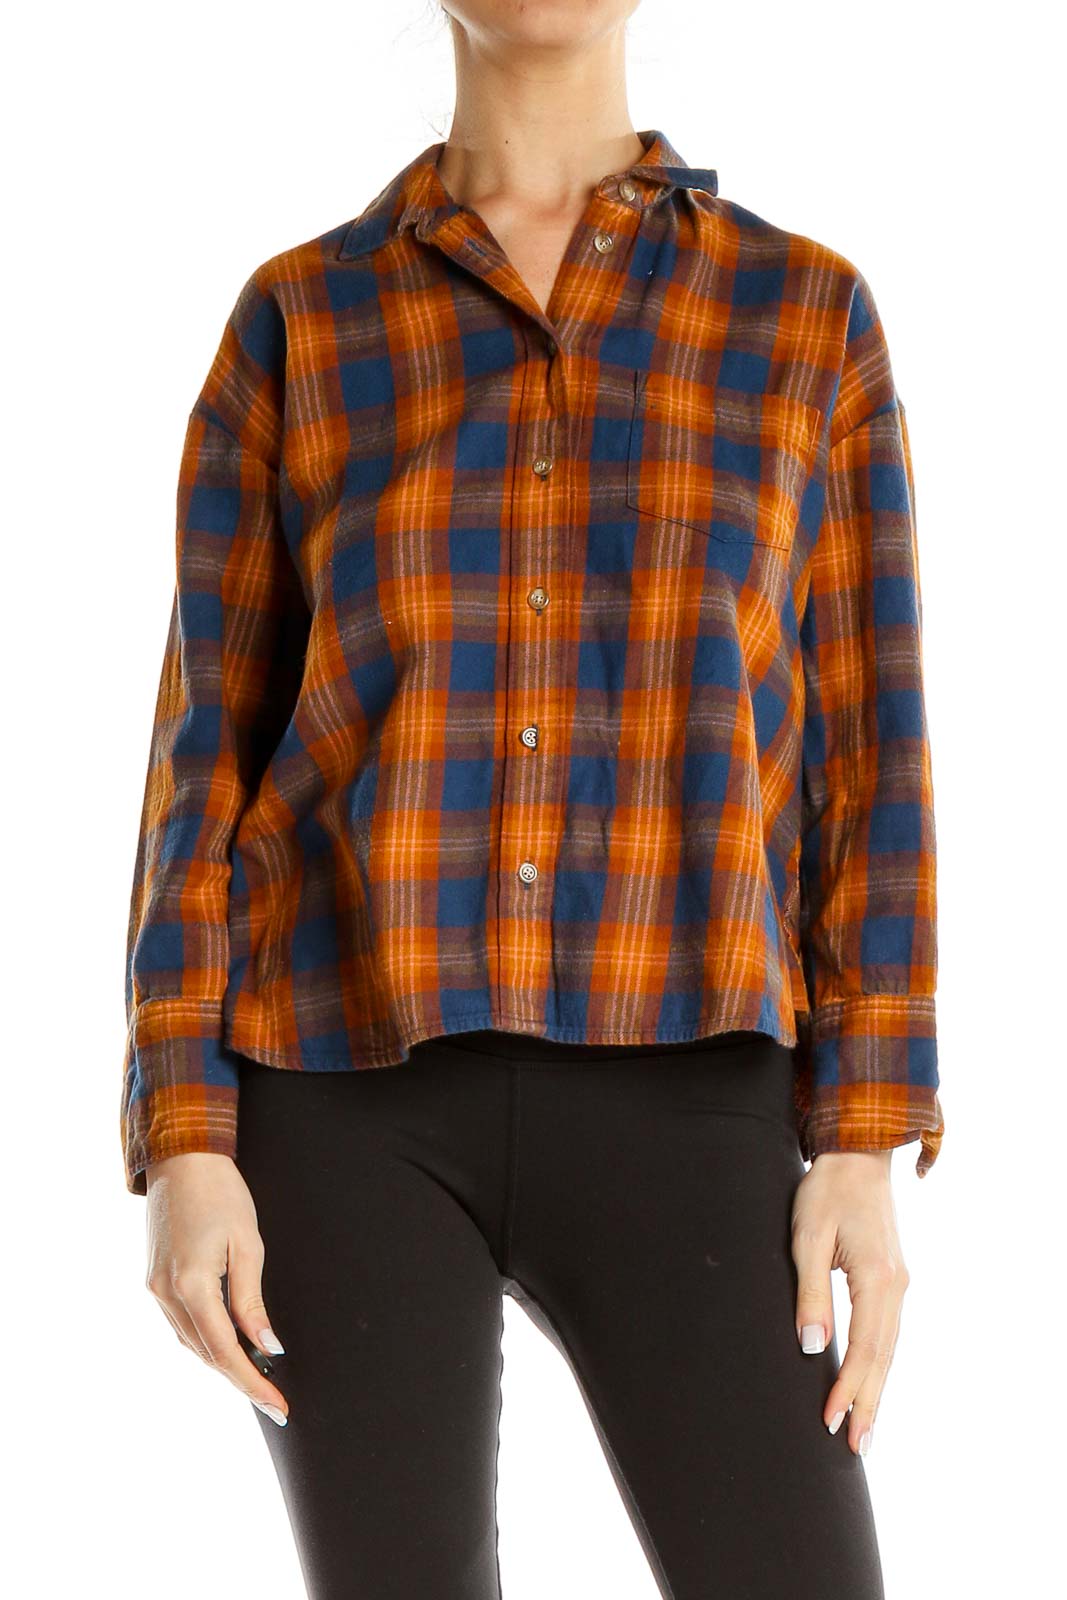 Blue Orange Checkered All Day Wear Top Front